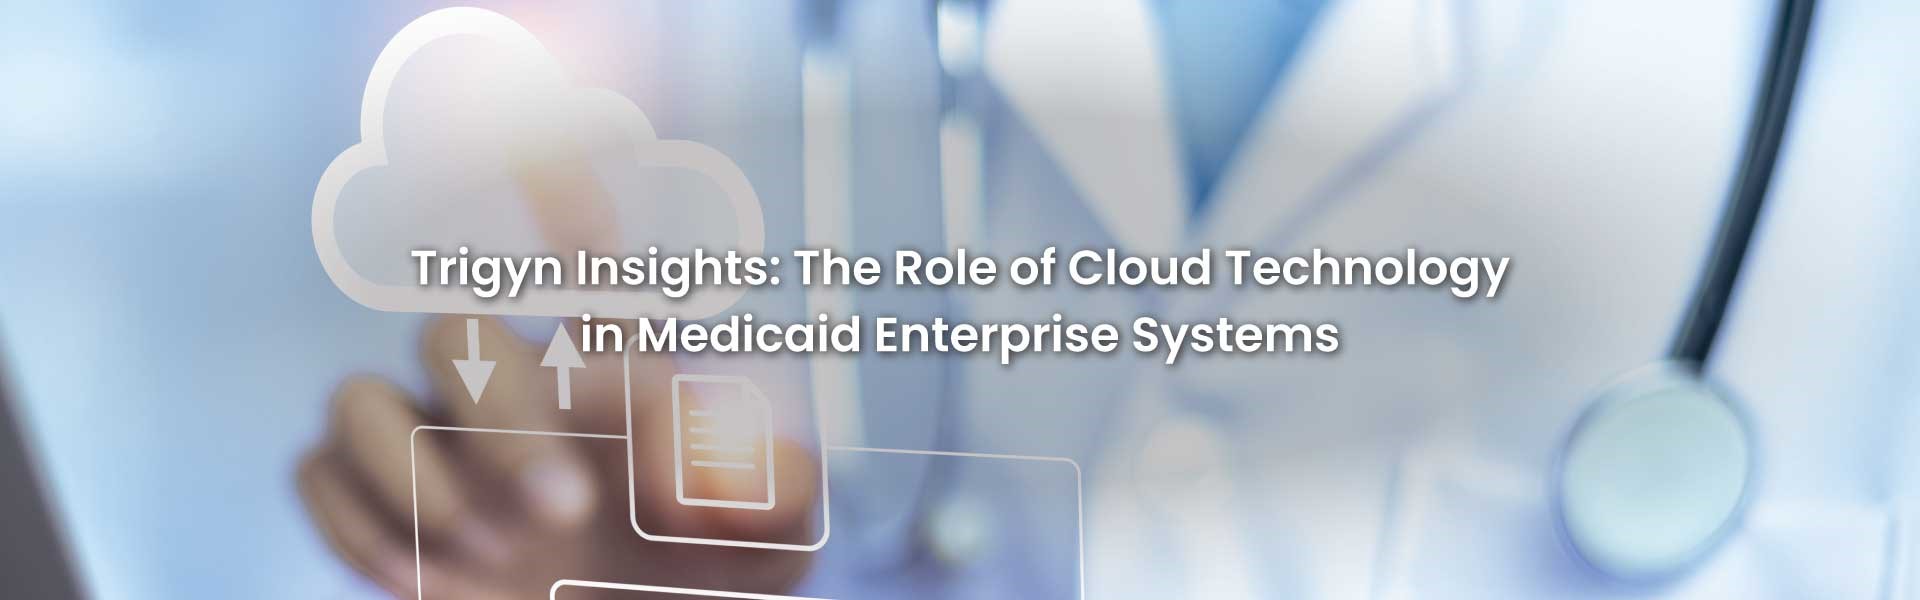 Cloud Technology in Medicaid IT Systems